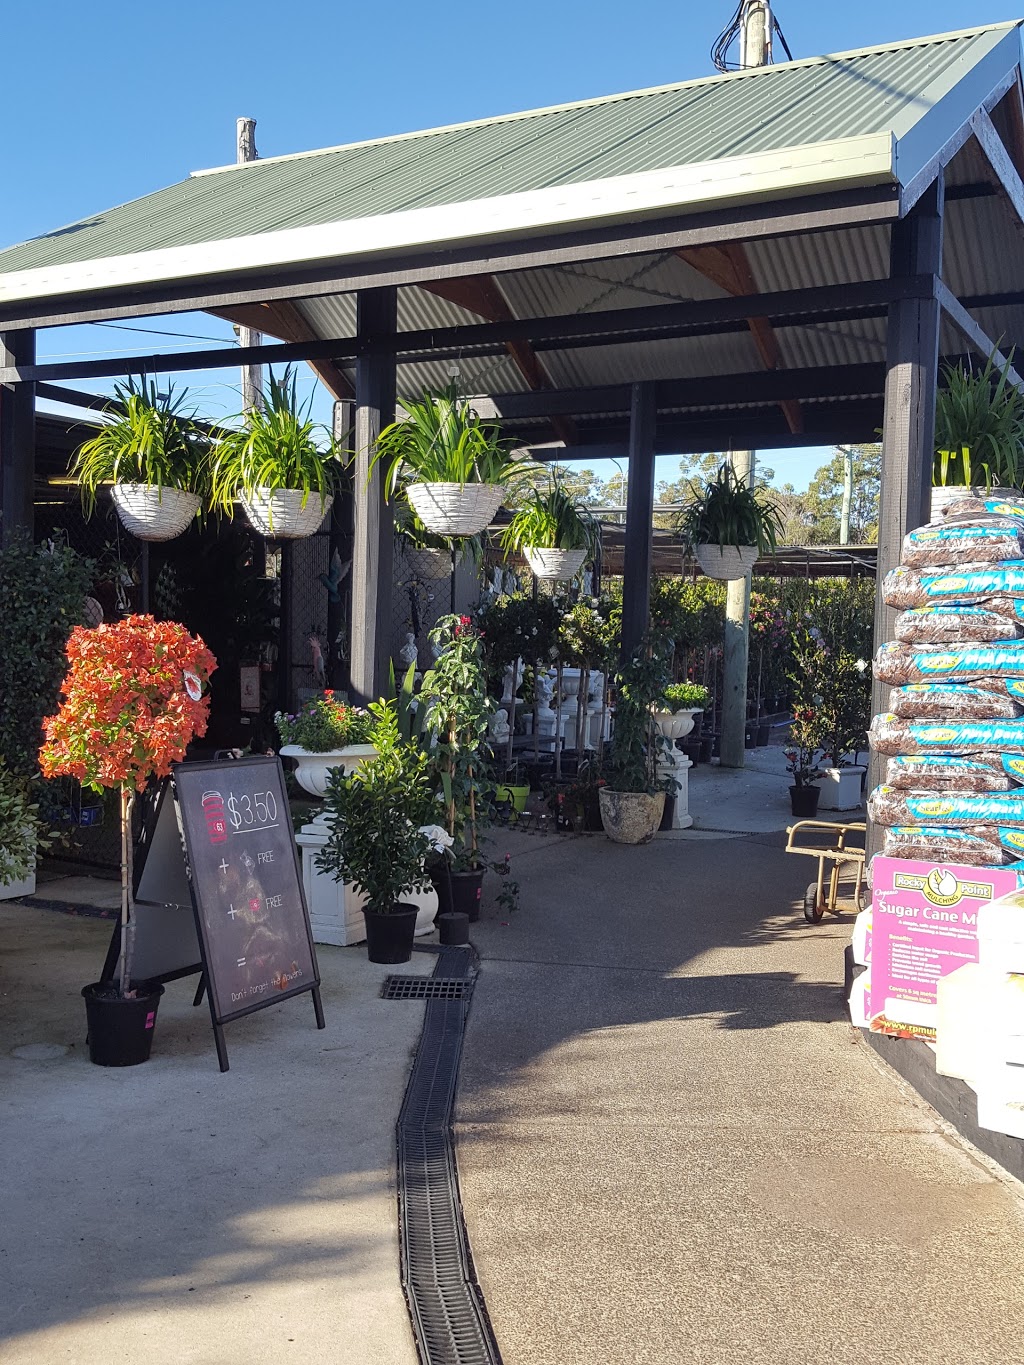 Ross Evans Garden Centre | store | 296-300 Oxley Dr, Runaway Bay QLD 4216, Australia | 0488010656 OR +61 488 010 656